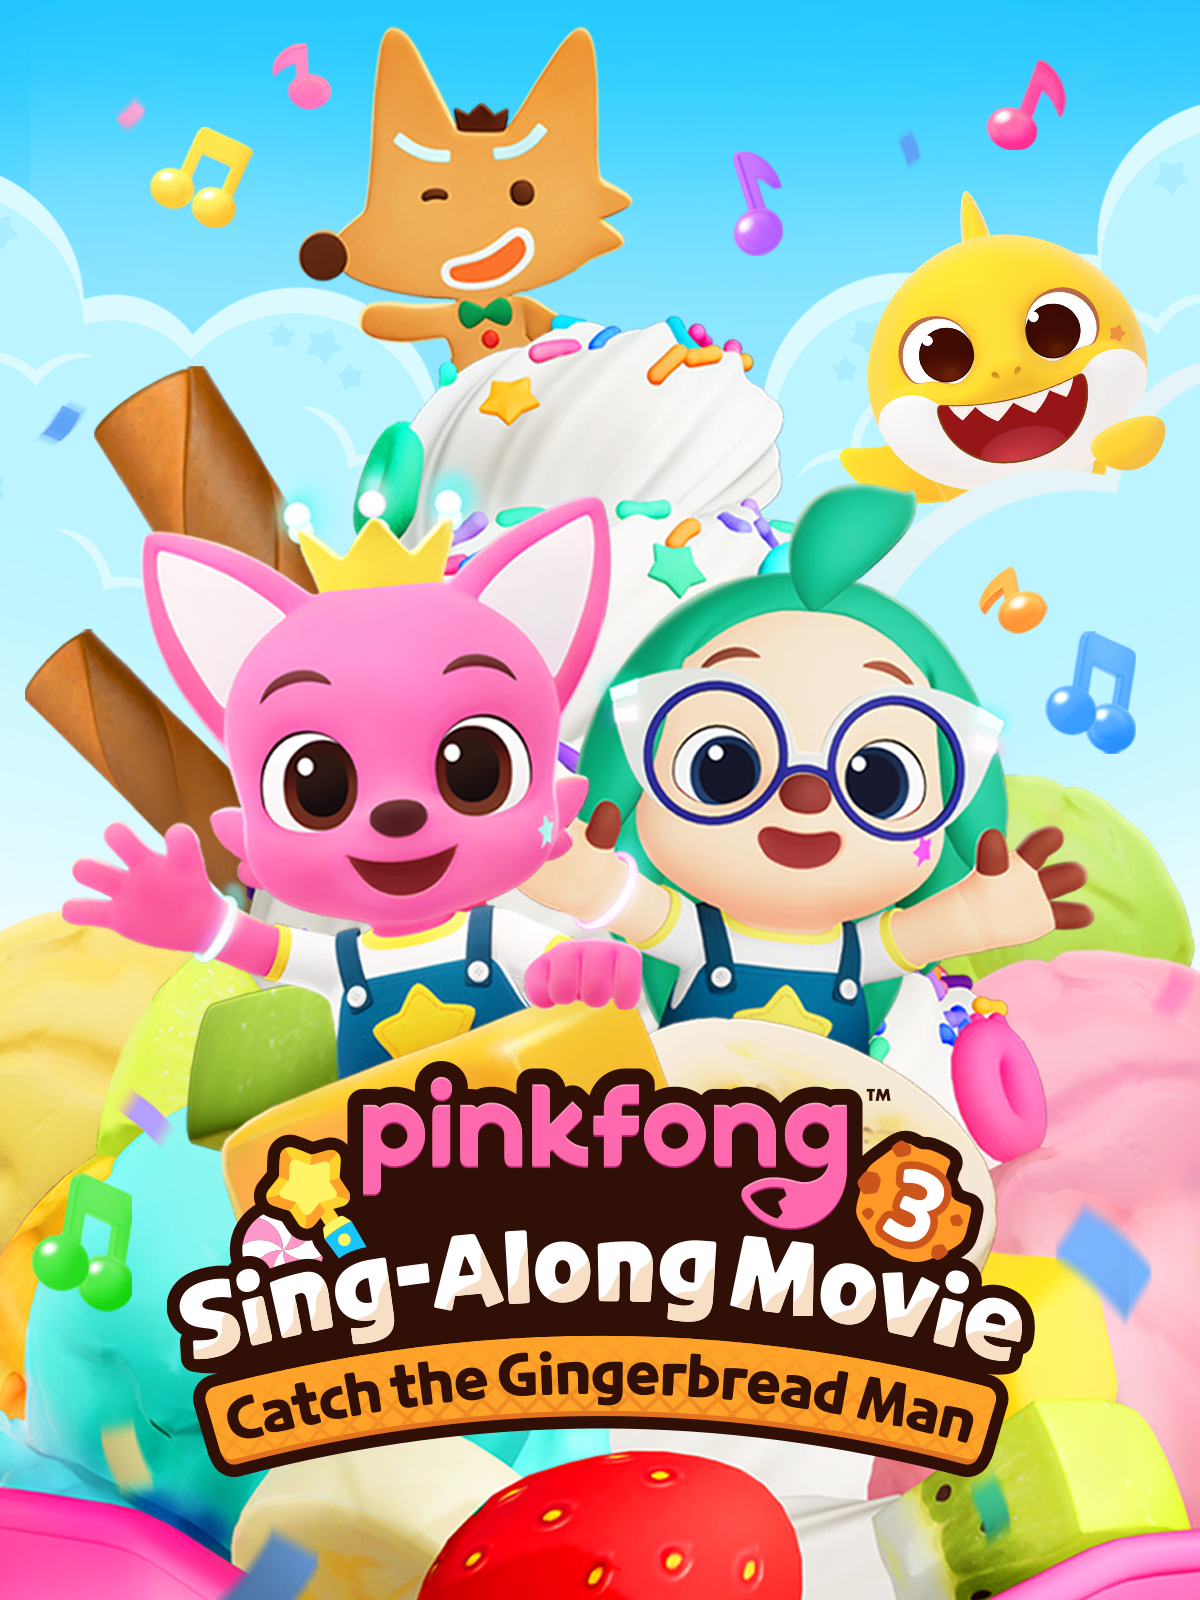 Pinkfong Sing-Along Movie 3: Catch the Gingerbread Man 2023